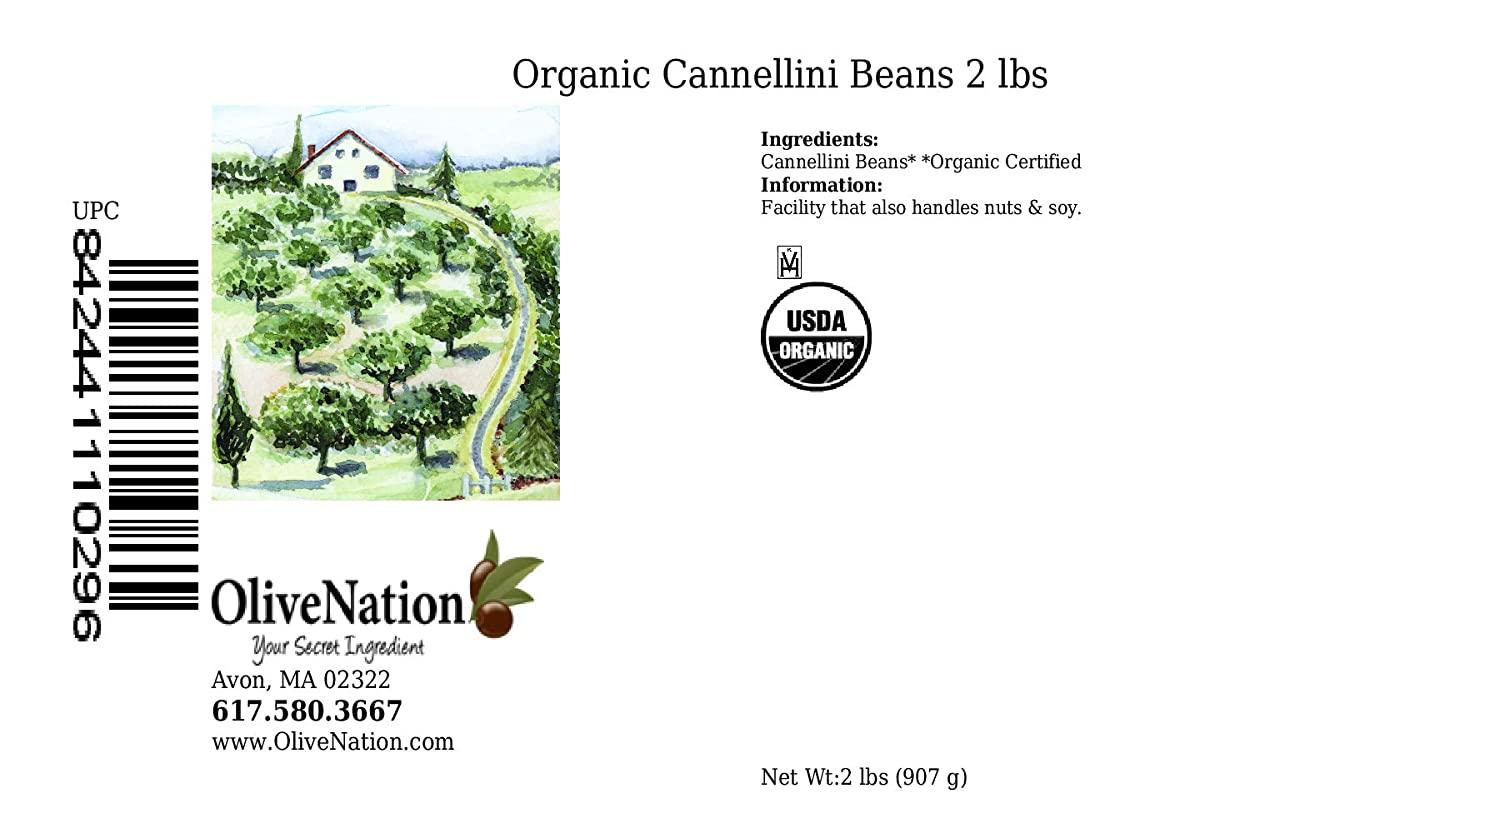 OliveNation Organic Cannellini Beans, Dry White Kidney Beans, Non